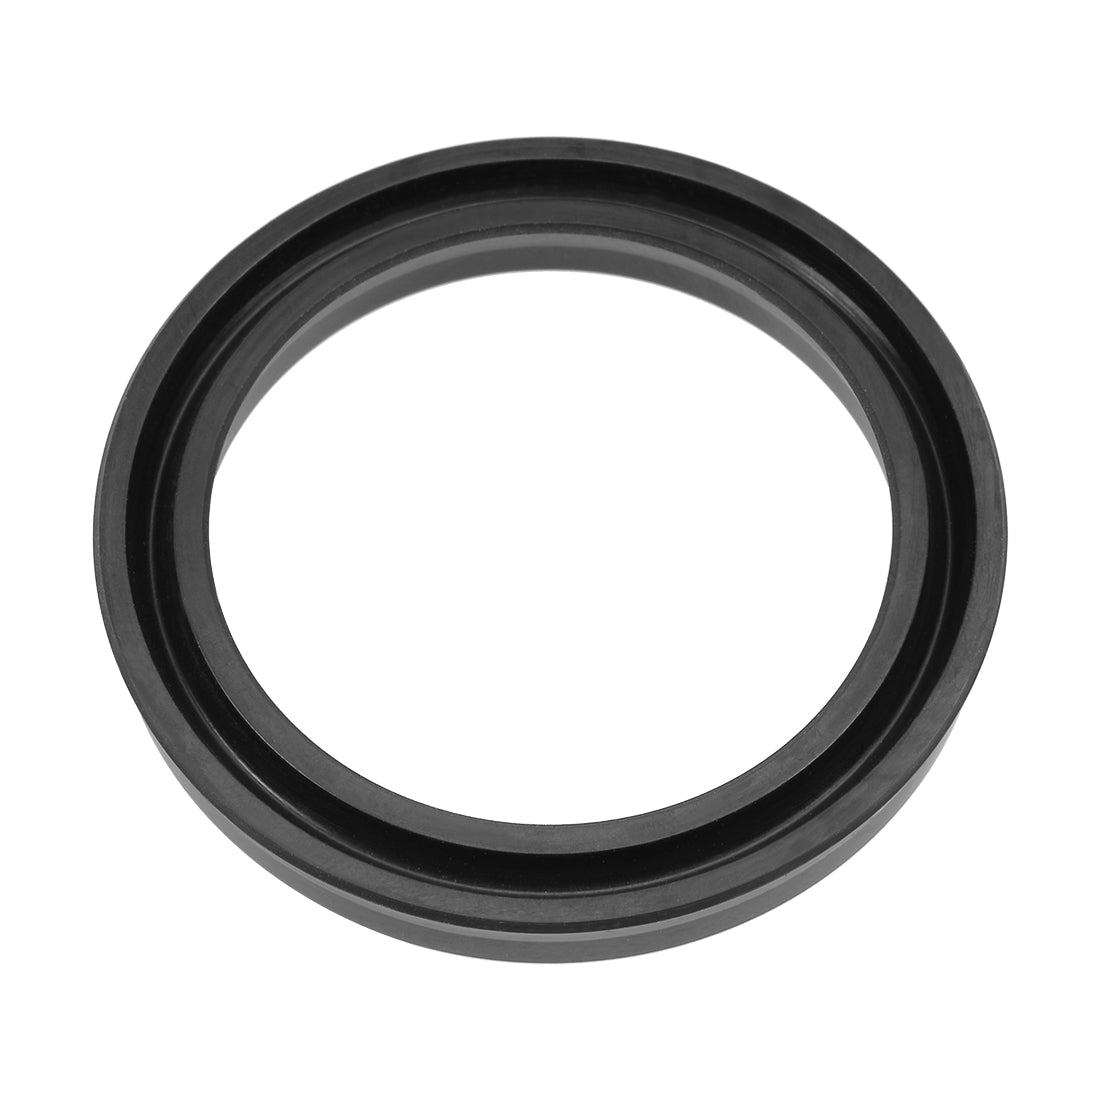 uxcell Uxcell Hydraulic Seal, Piston Shaft USH Oil Sealing O-Ring, 28mm x 35mm x 5mm